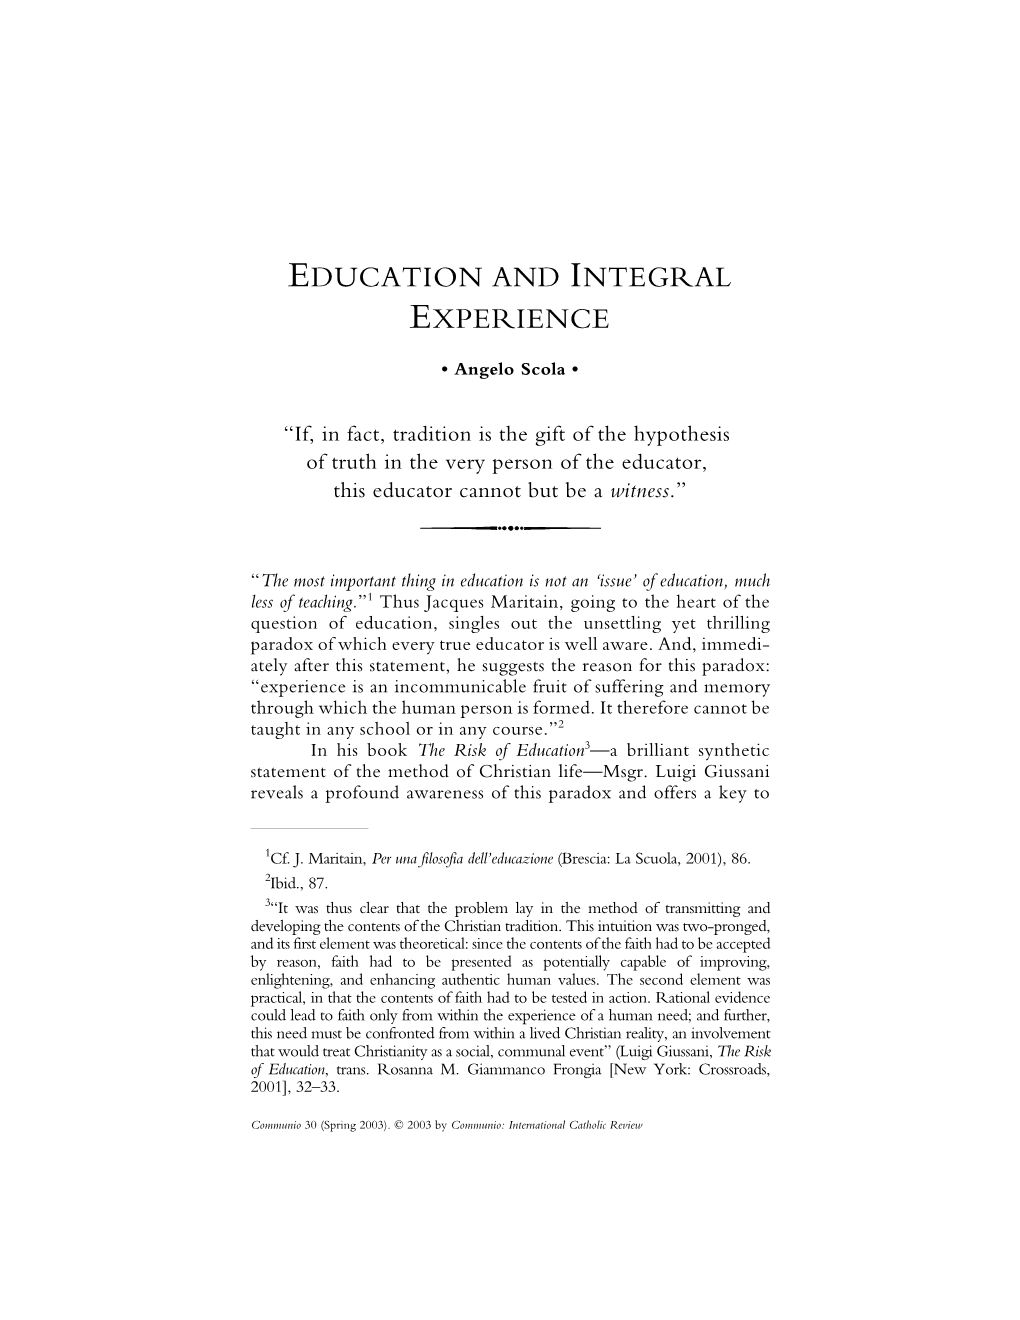 Angelo Scola. Education and Integral Experience. Communio 30 (2003)